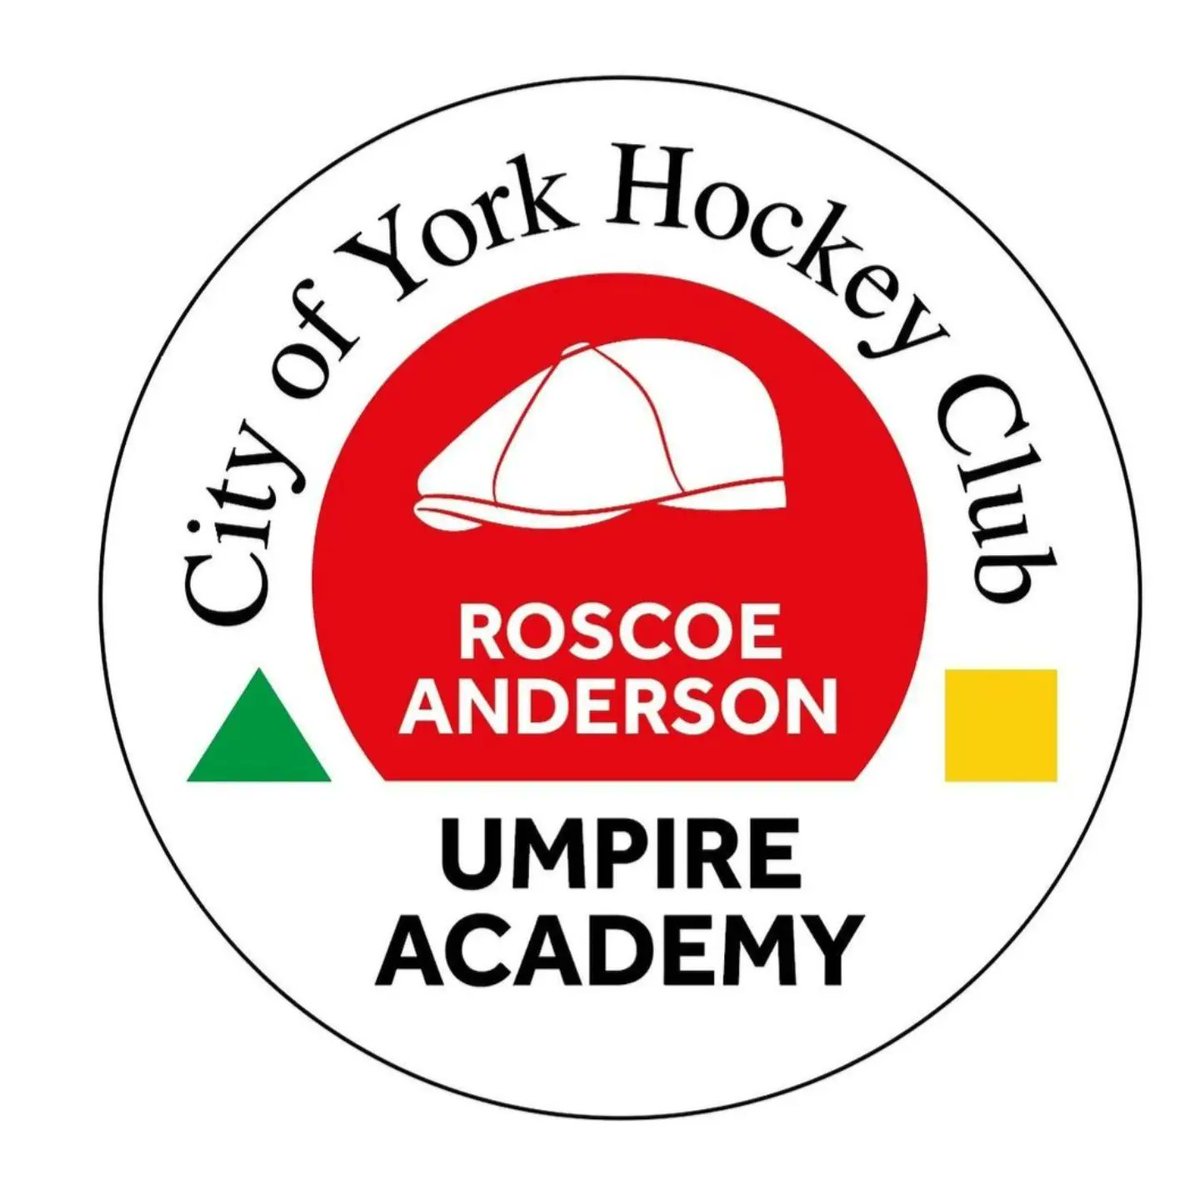 Congratulations to Heather on passing her level 1 assessment. Our newest graduate from The Roscoe Anderson Umpire Academy. If you are interested in getting involved in umpiring get in touch #umpire #redandblackarmy #hockeyfamily @CoYHCJunior @ynejuniorhockey @EnglandHockey